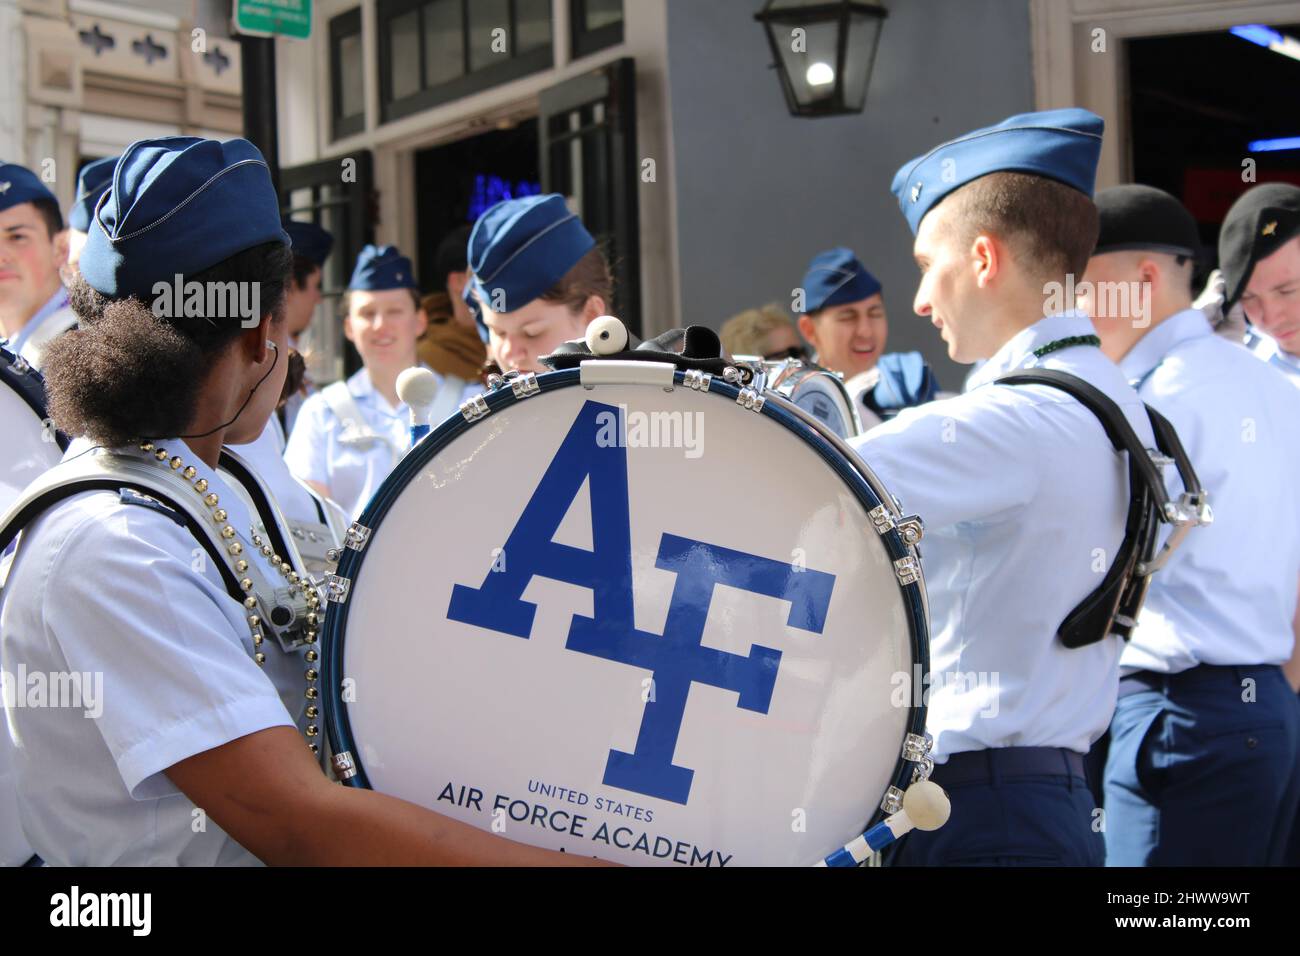 Air Force Academy Cadet Marching Band in the French Quarter, New Orleans Stock Photo